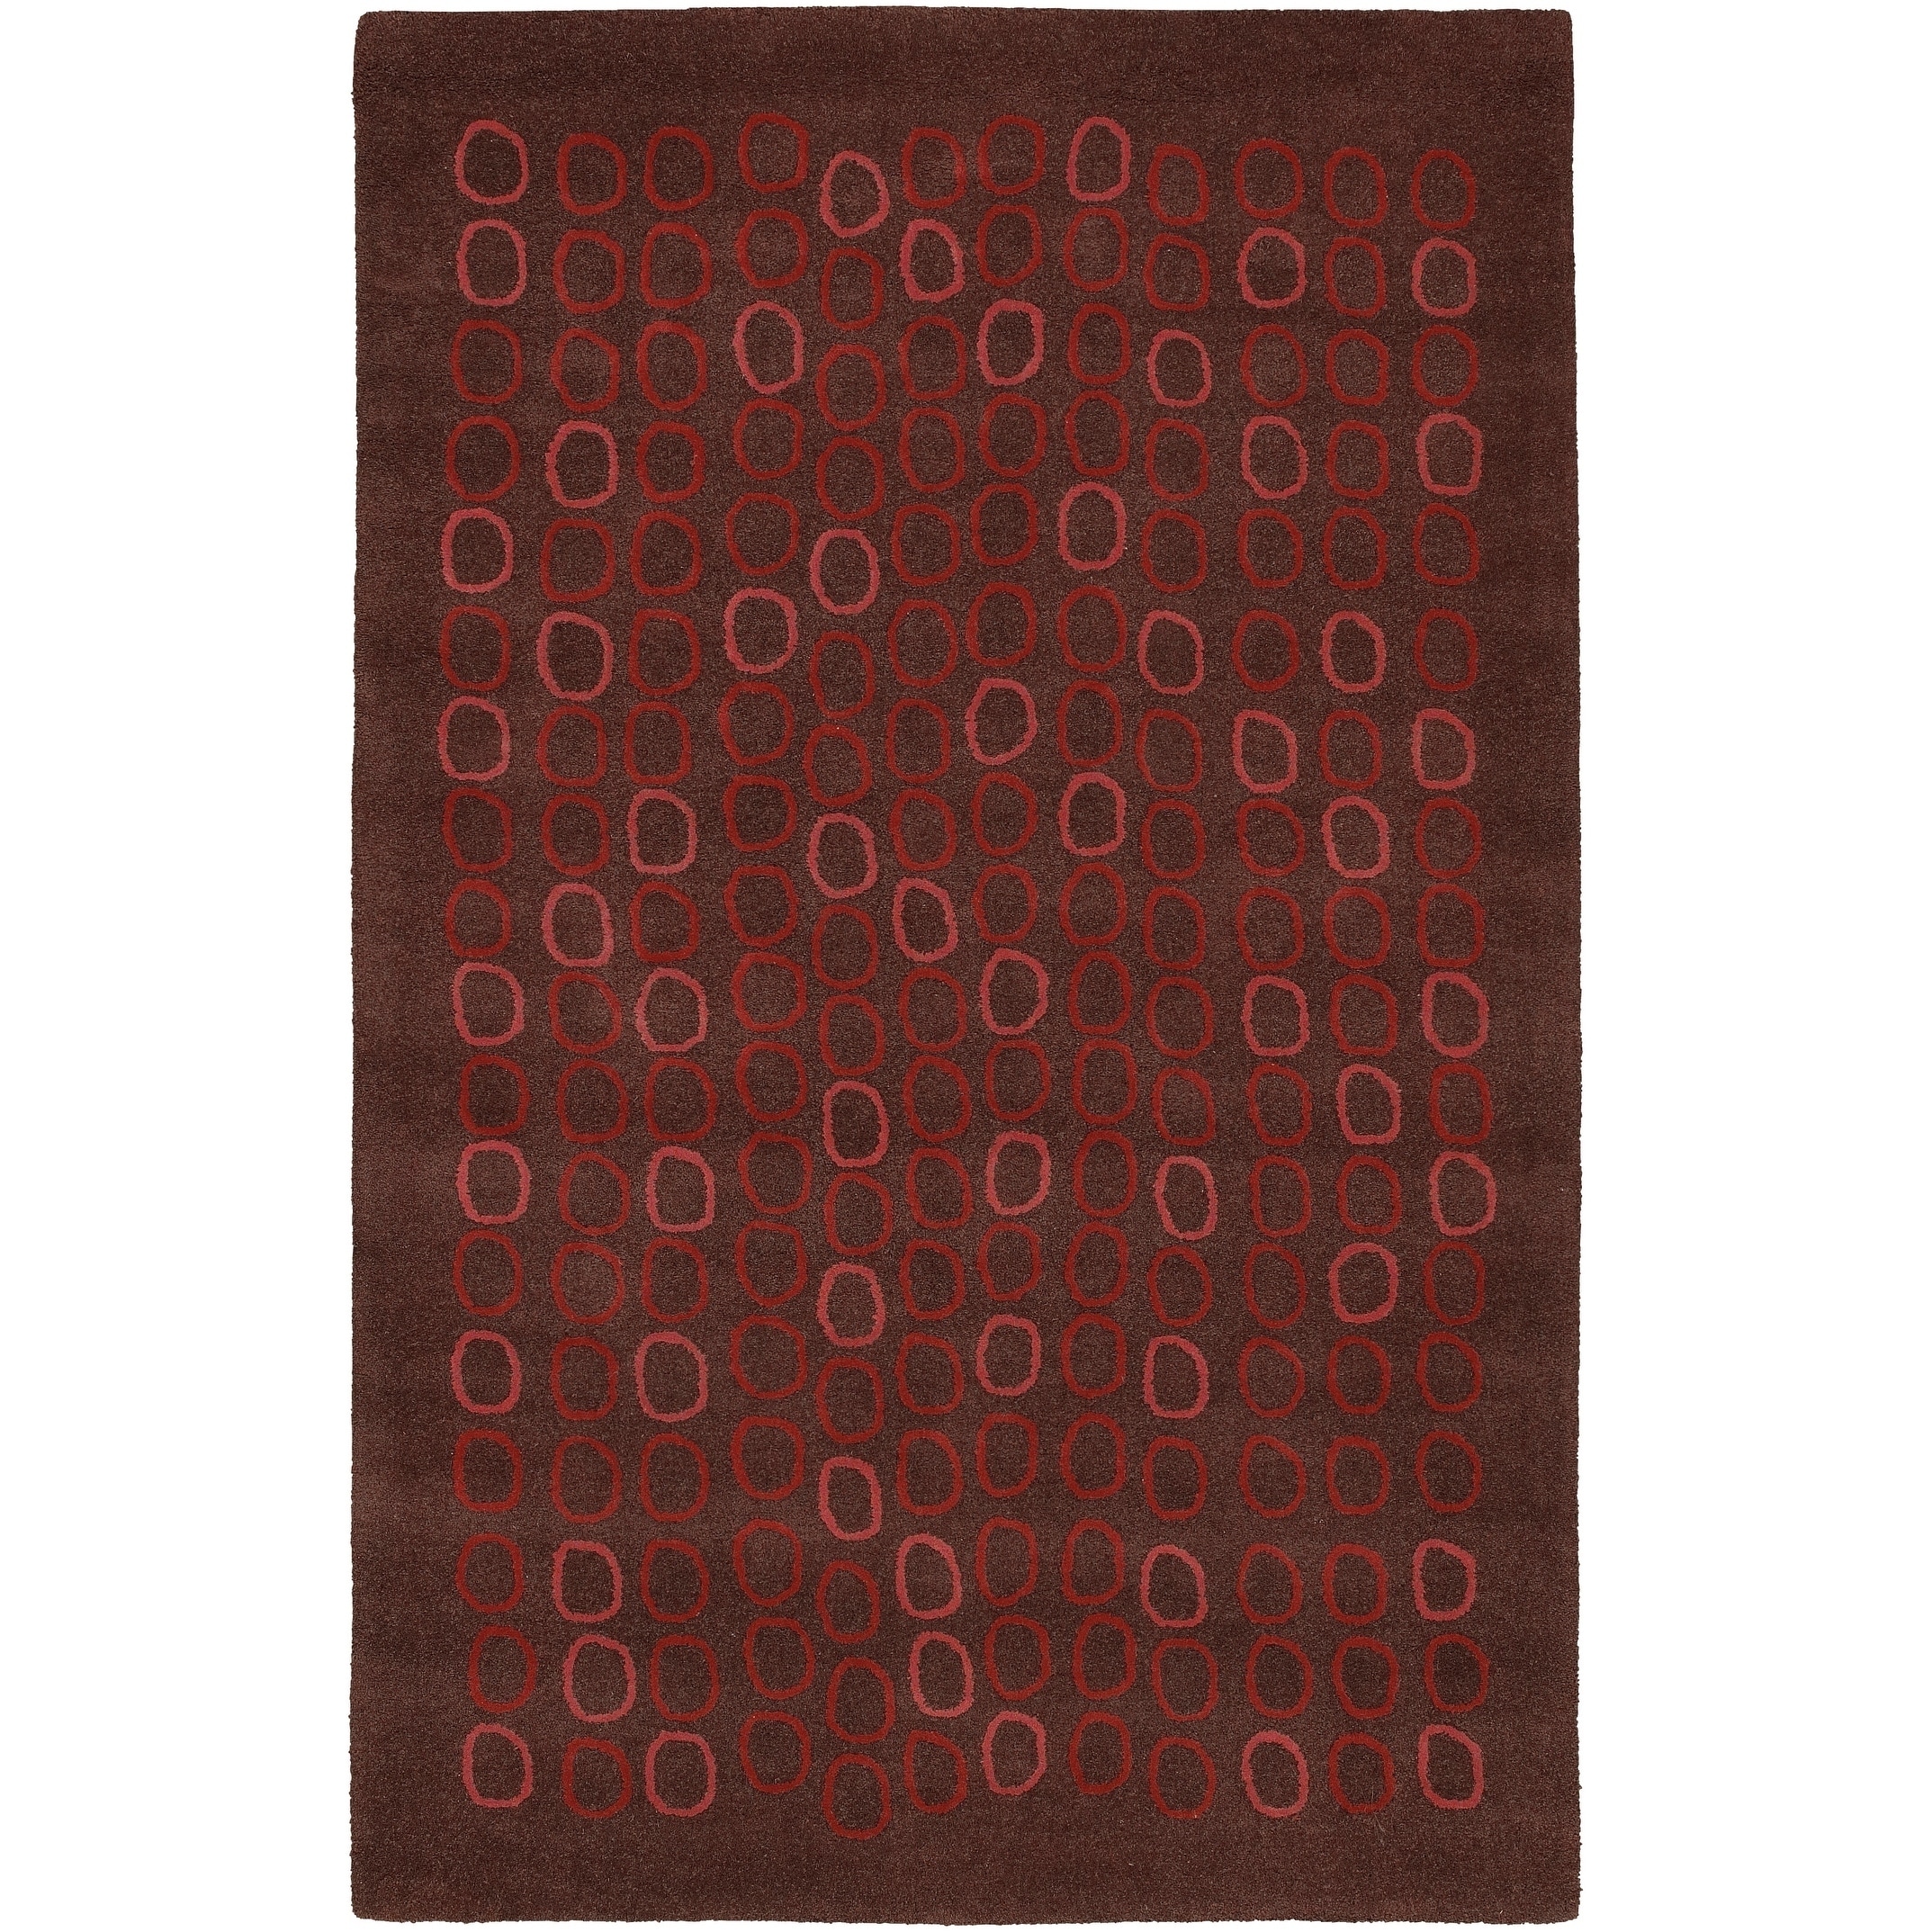 Woven Wool Area Rug with Geometric Floral Details (2.5x4.5), 'Flowers from  the Silk Road